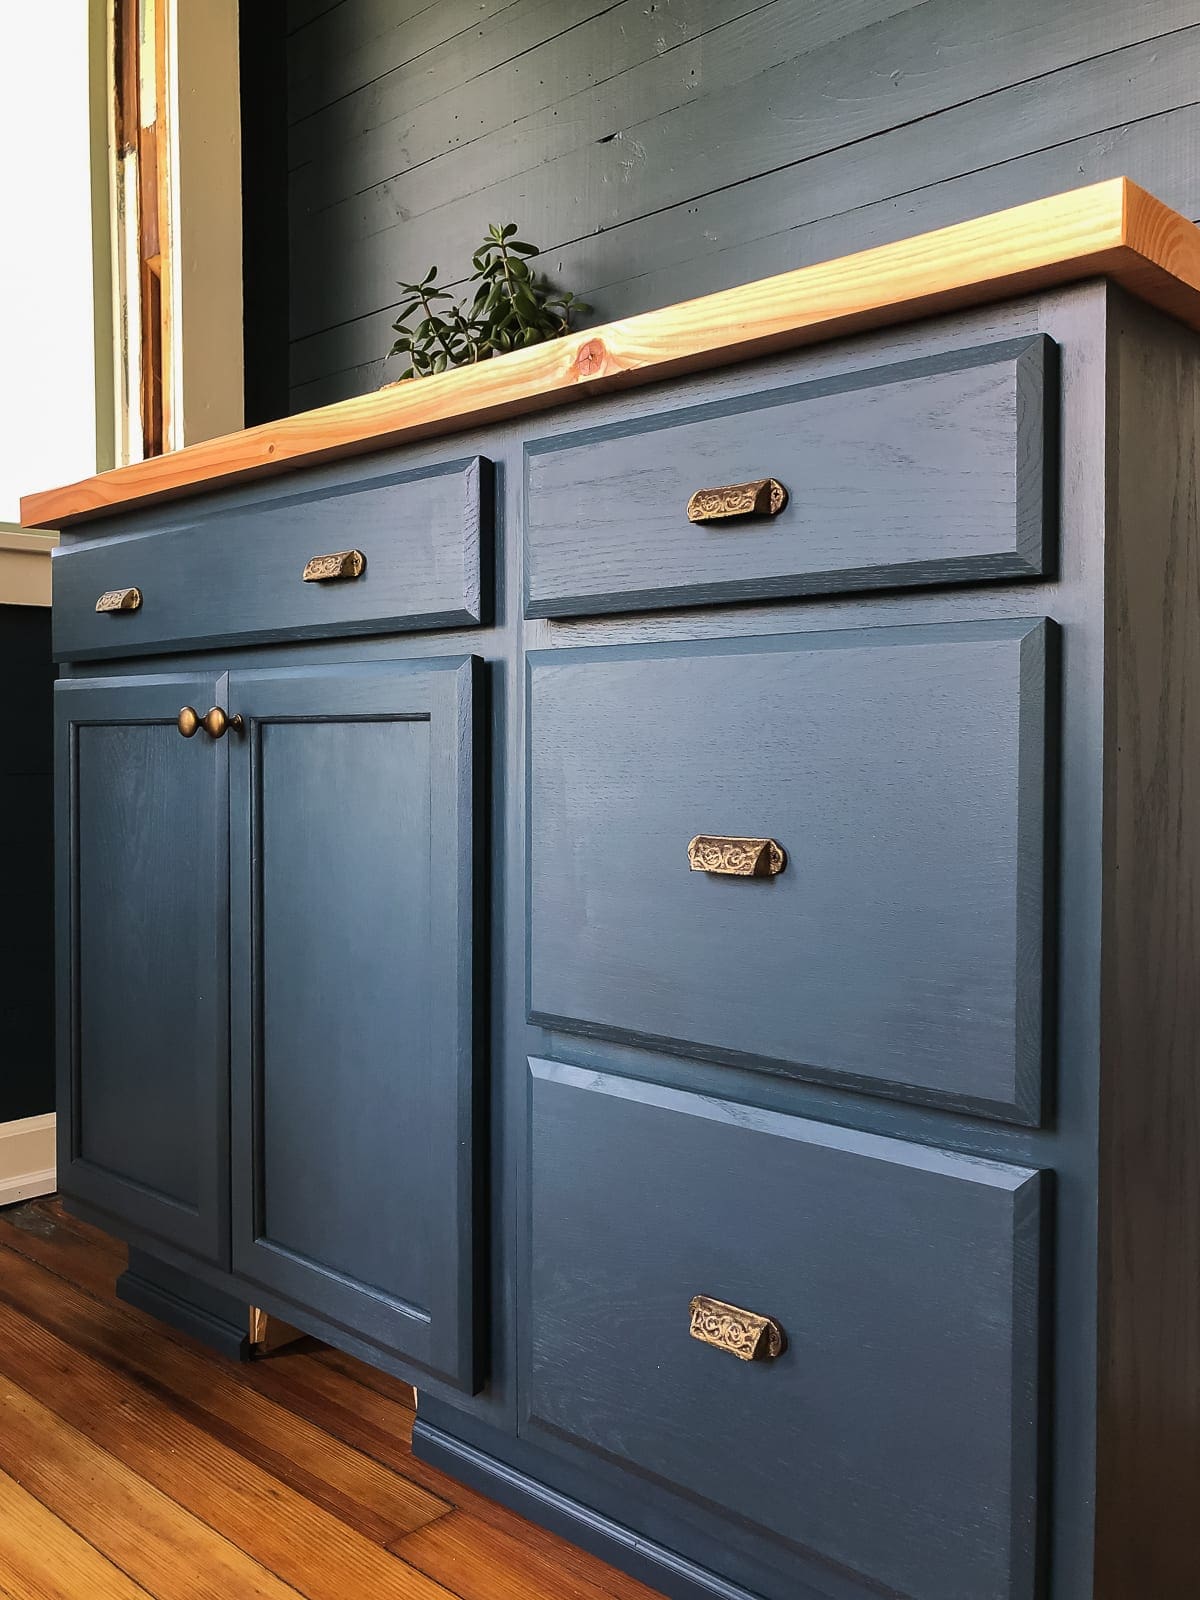 Painting Unfinished Cabinets How To, How To Paint Unfinished Birch Cabinets